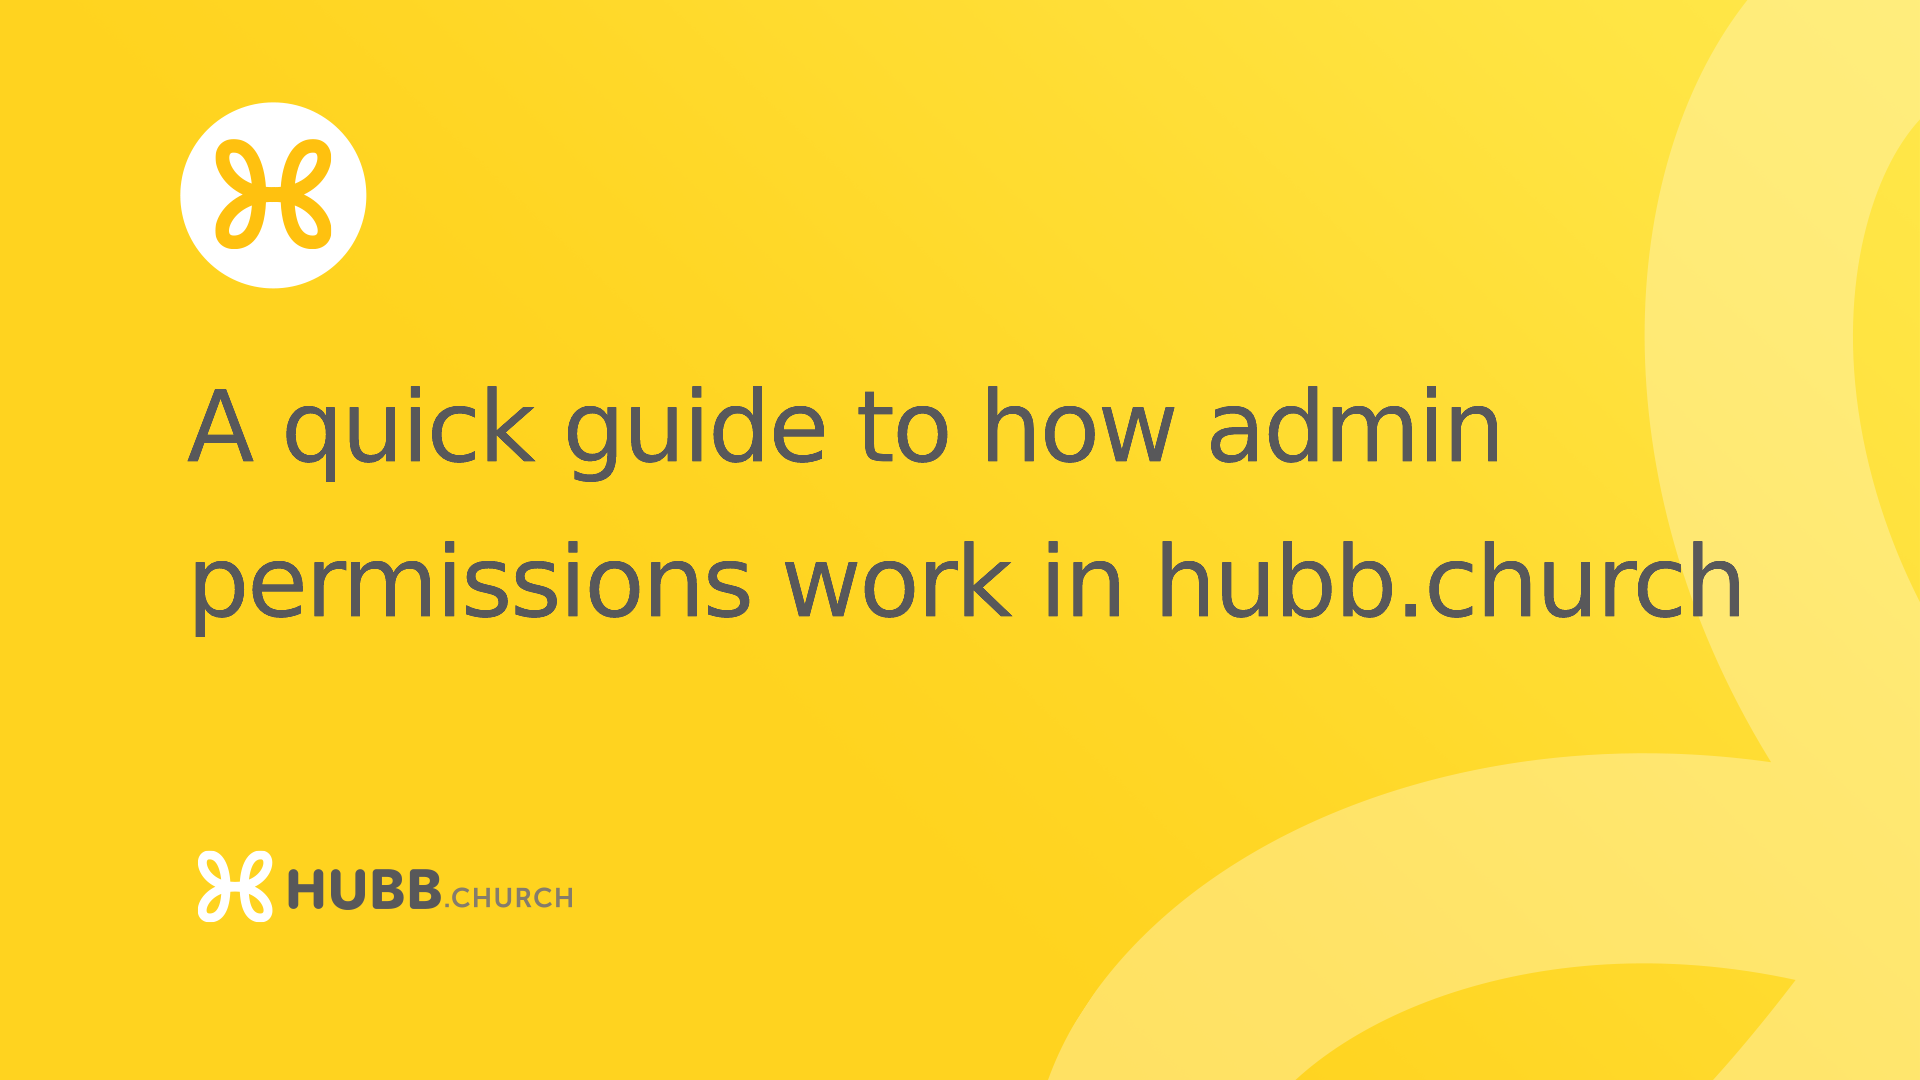 A quick guide to how admin permissions work in hubb.church